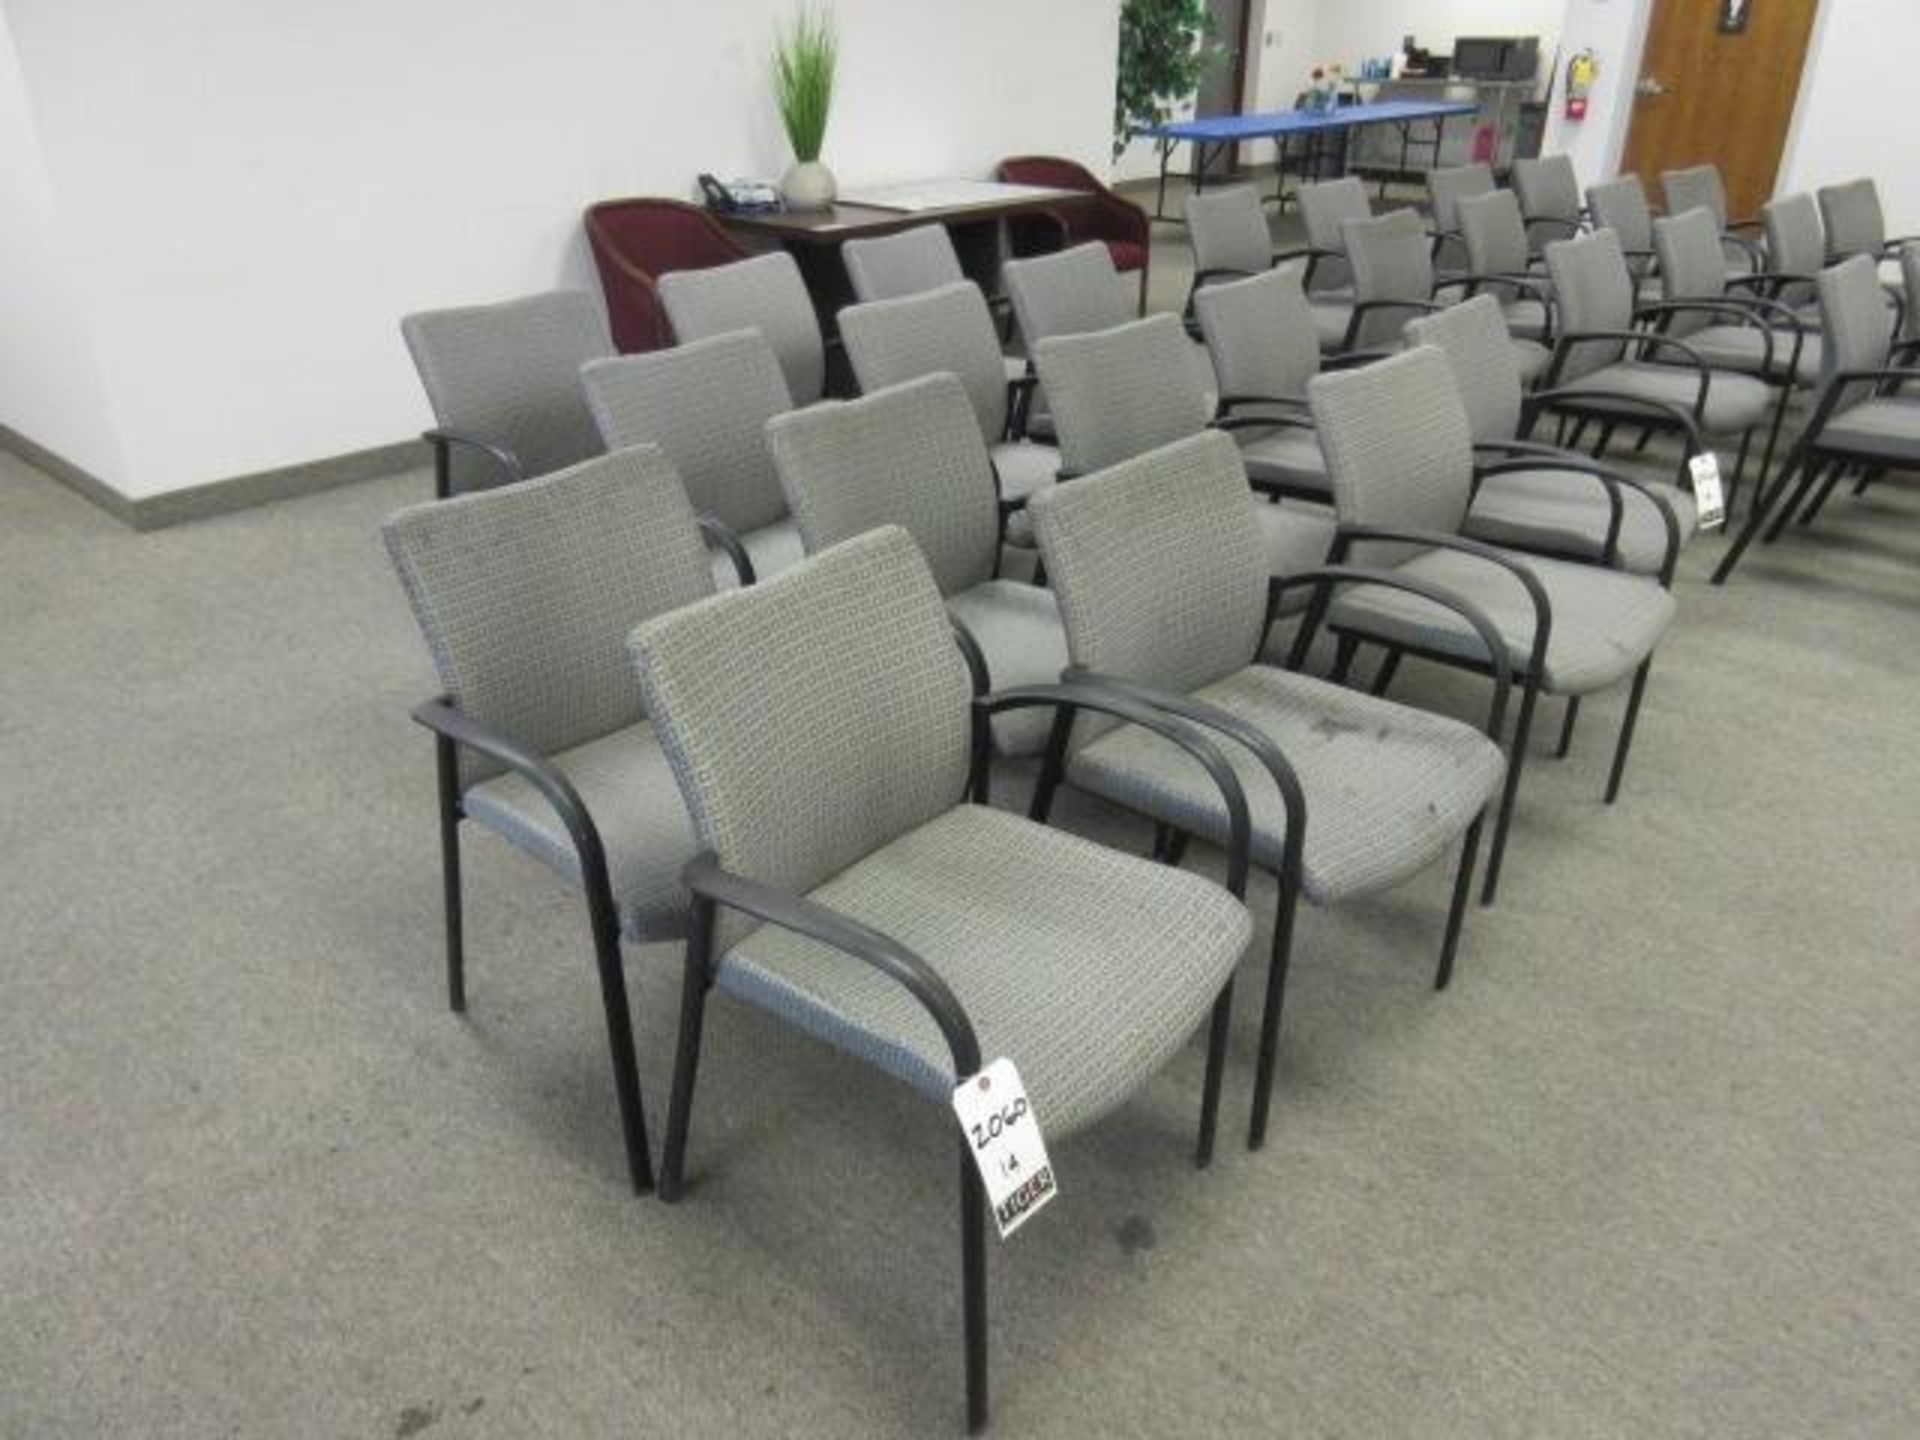 Meeting Room Chairs - Image 4 of 5